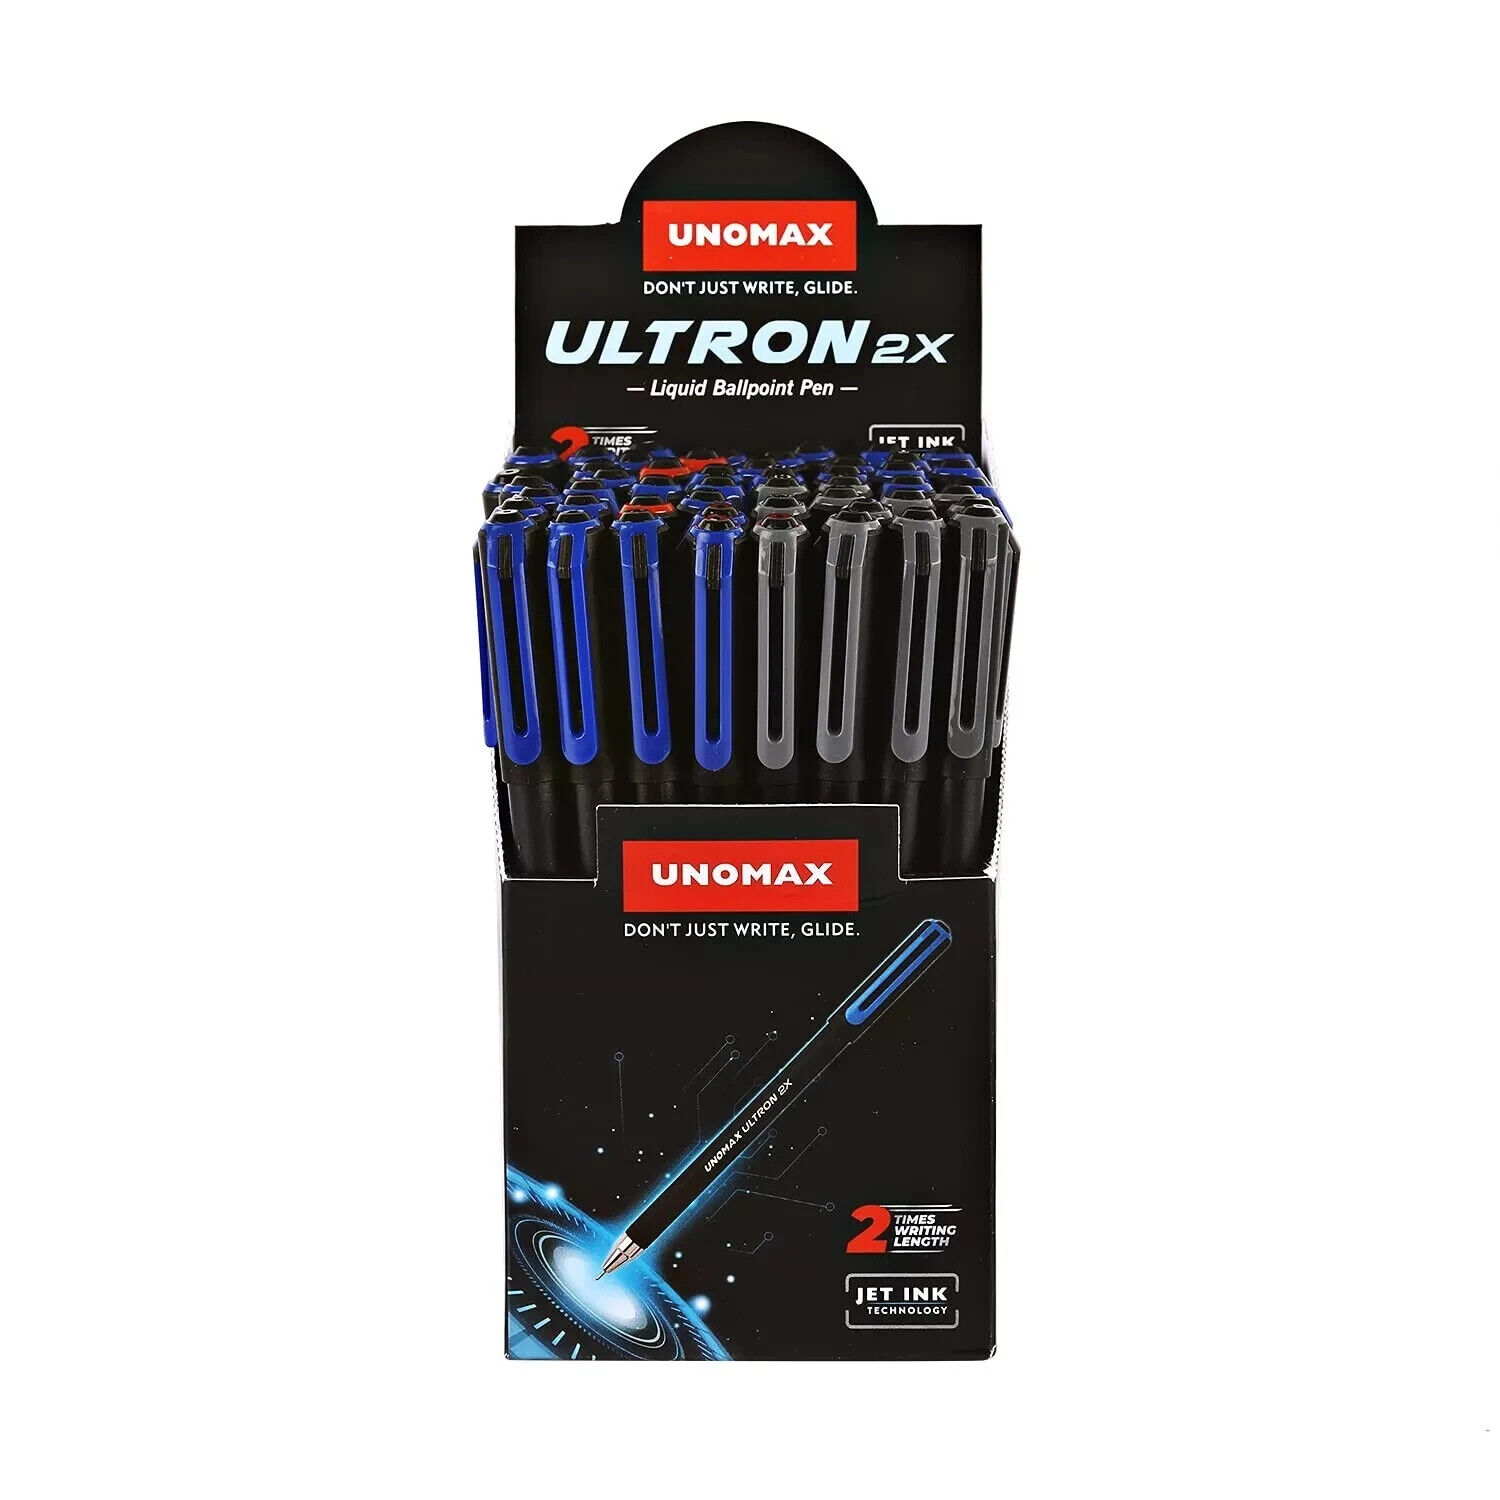 Unomax Ultron 2x Liquid Ball Point Pen for schools And offices (Pen jar- 50pcs)